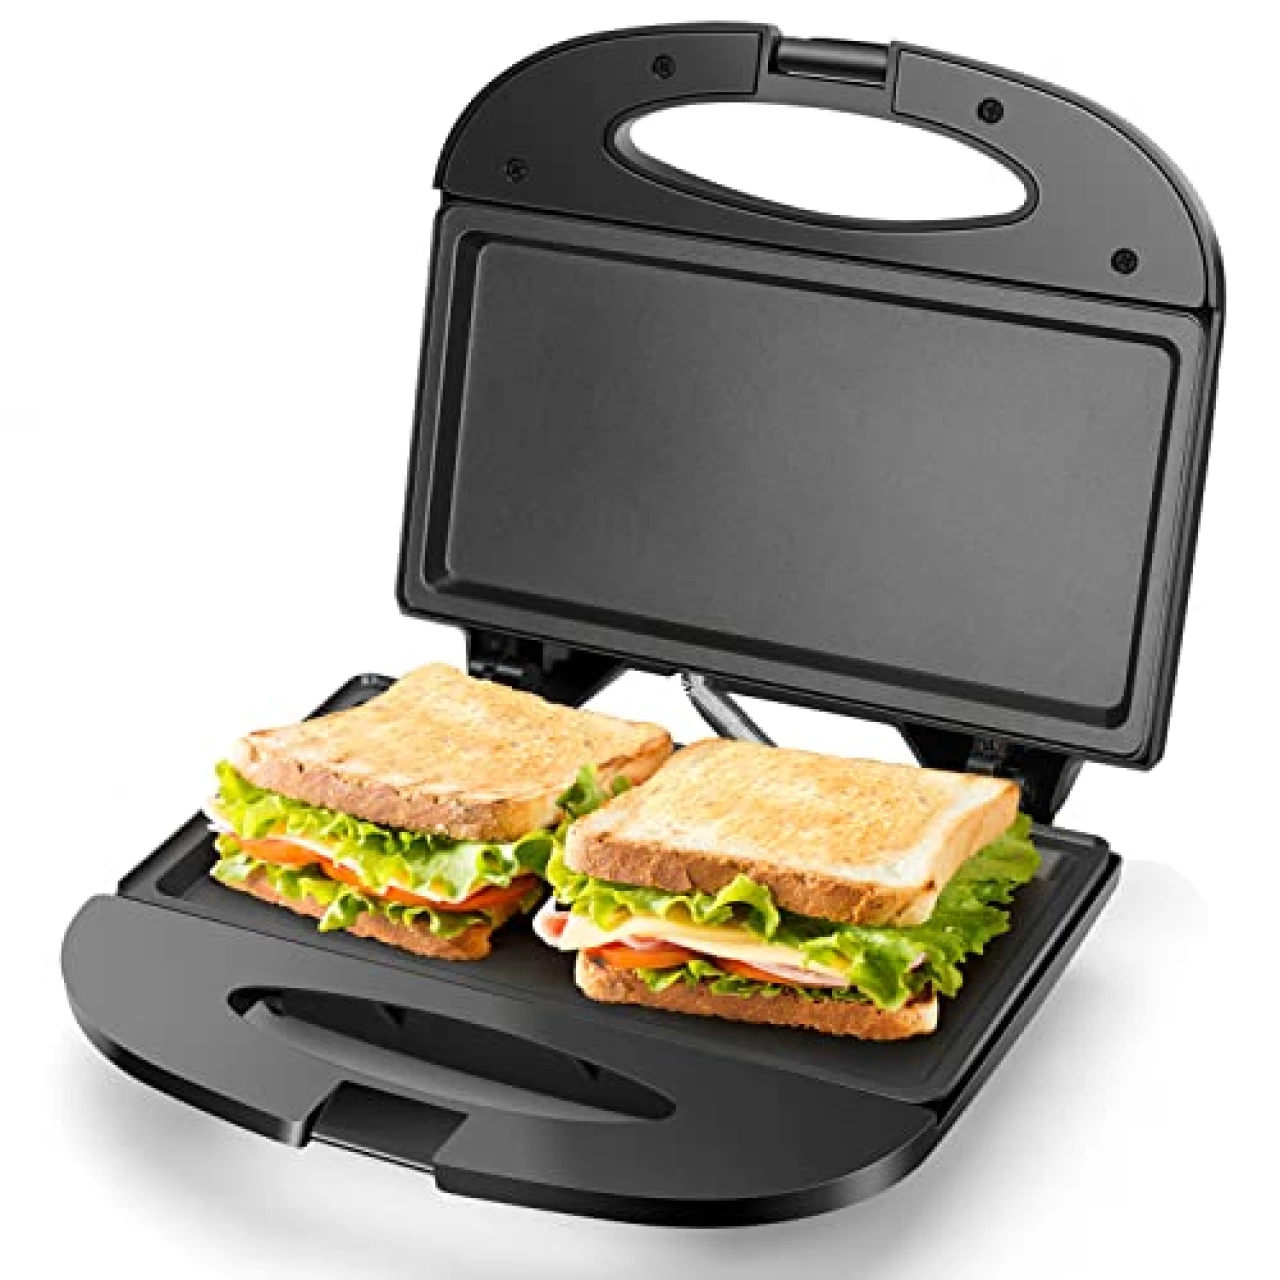 Aigostar Sandwich Maker with Non-stick Deep Grid Surface for Egg, Ham, Steaks Compact Electric Grill Black